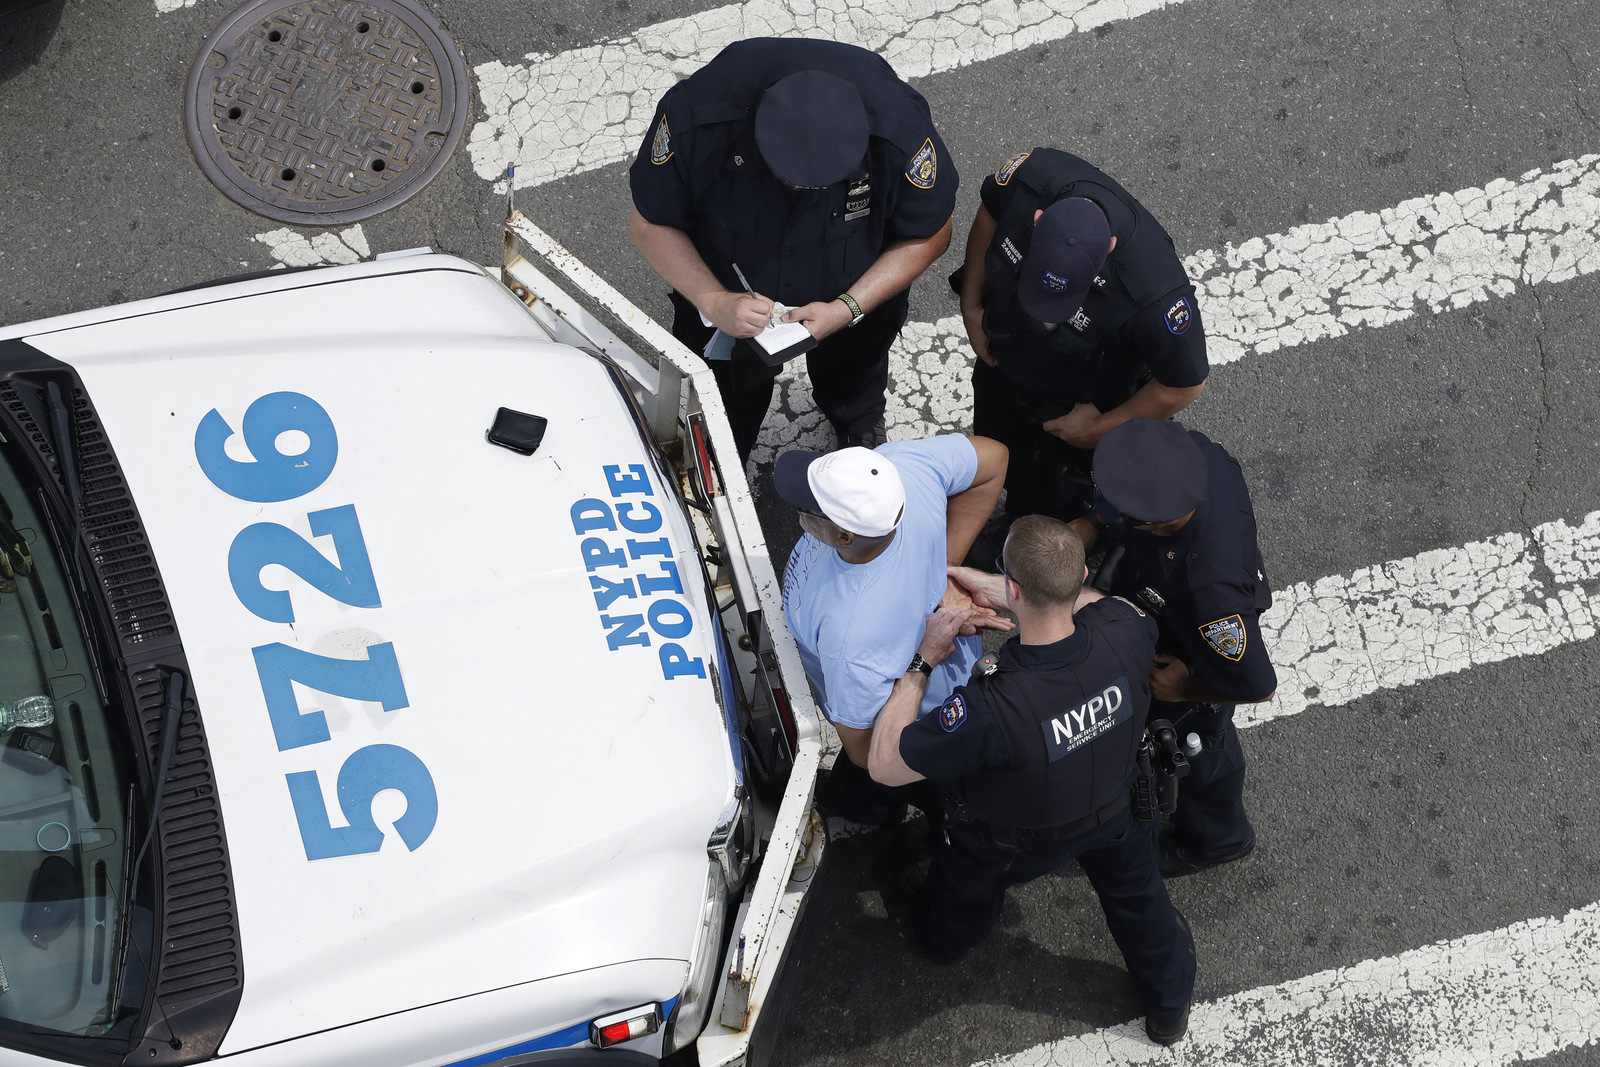 New York City police officers detain and question a man, Tuesday, July 11, 2017, in the Bronx borough of New York. The man was released. (AP/Mark Lennihan)